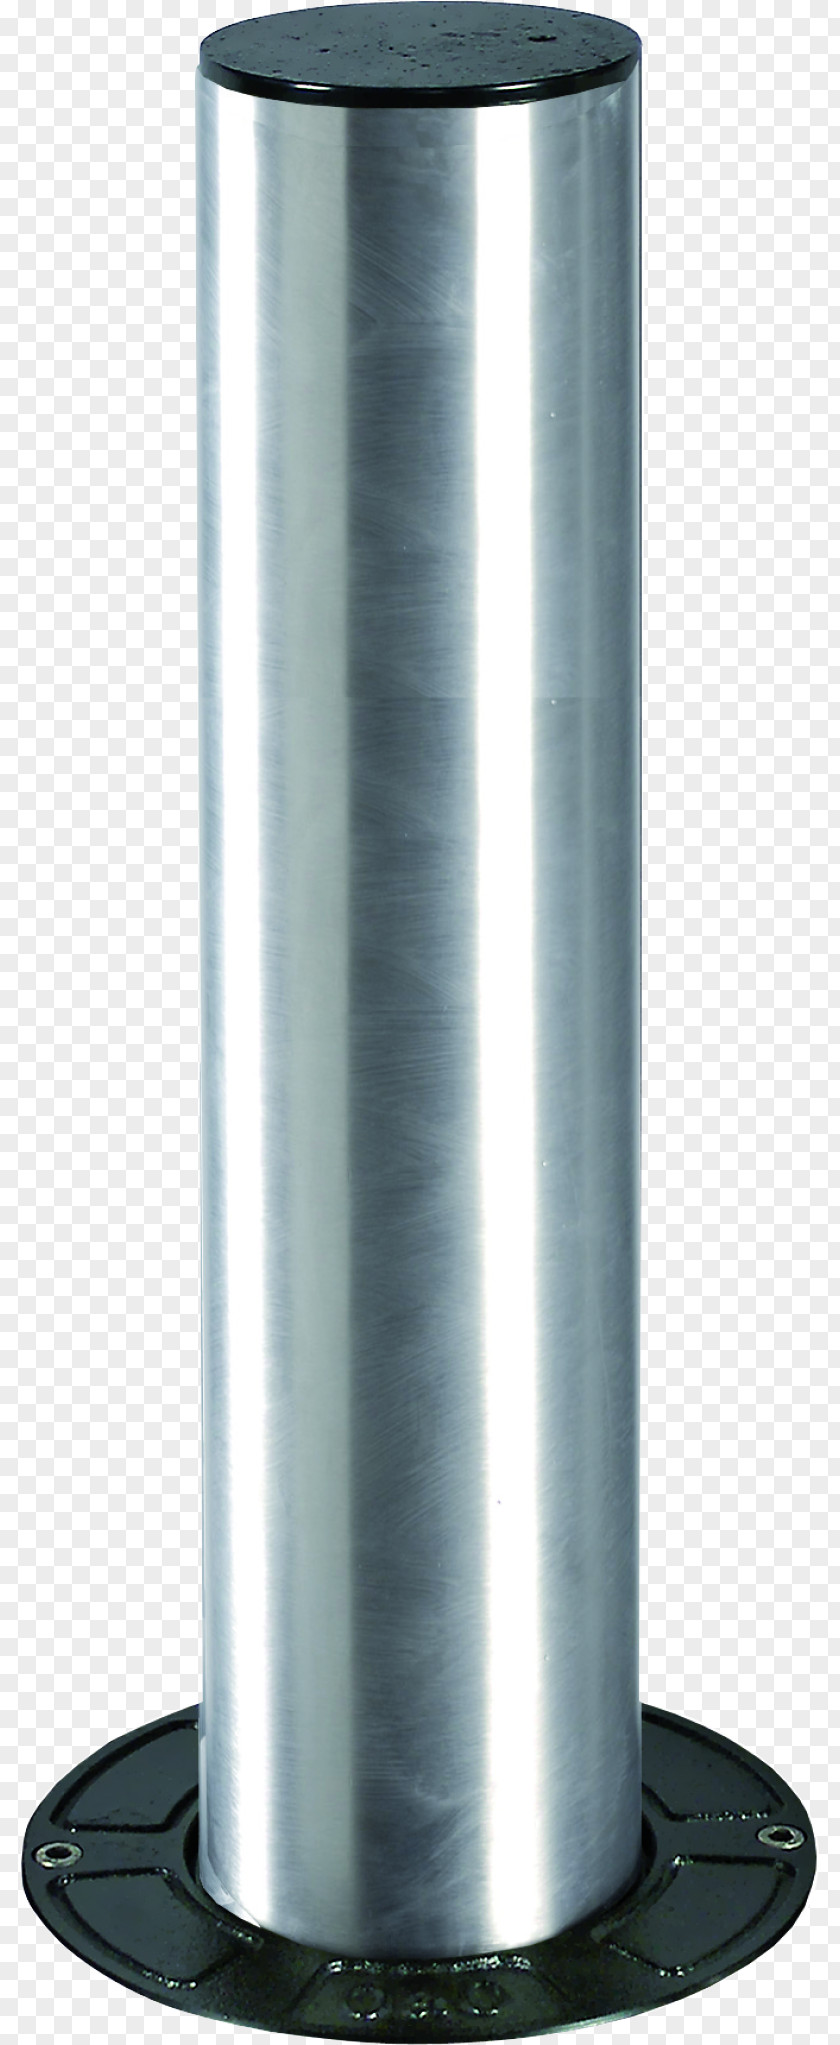 Scudo Bollard Stainless Steel Computer Hardware Product Manuals PNG